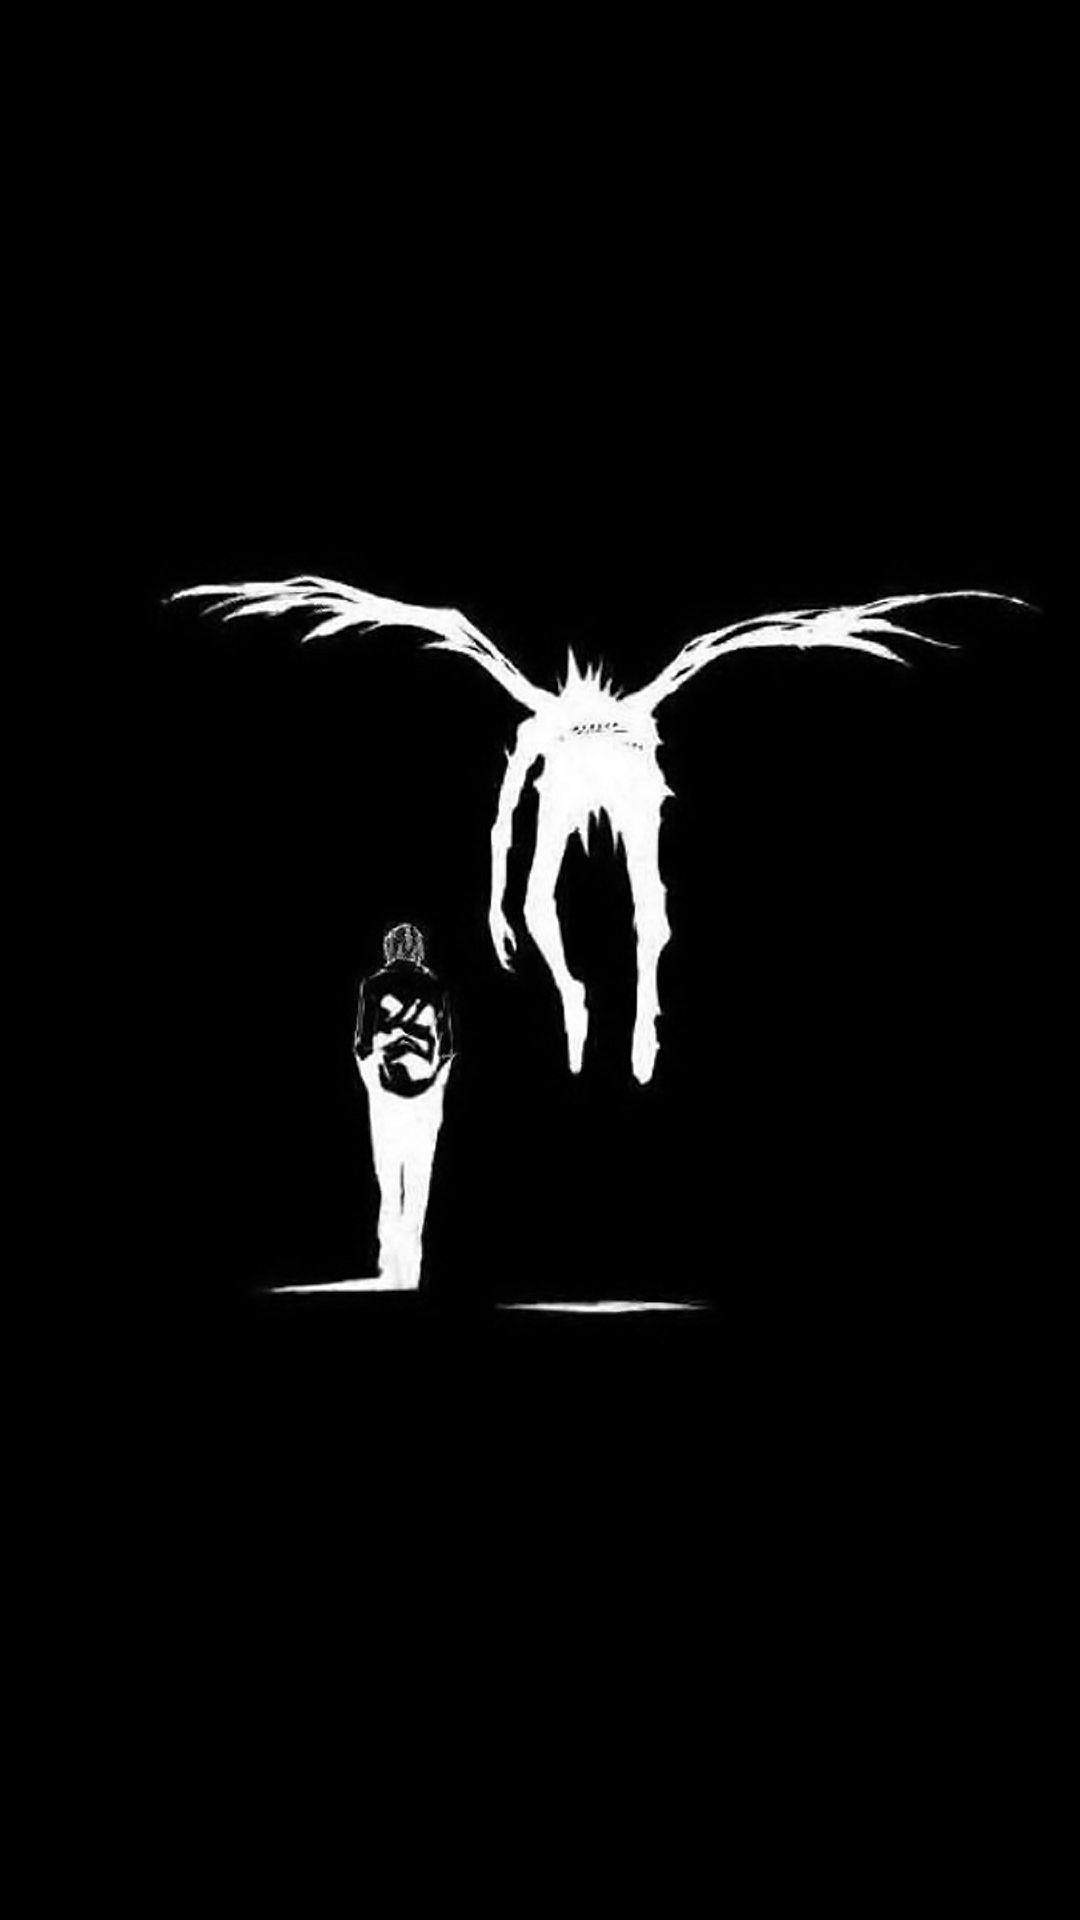 Manga Death Note Iphone Wallpaper Iphone Wallpapers